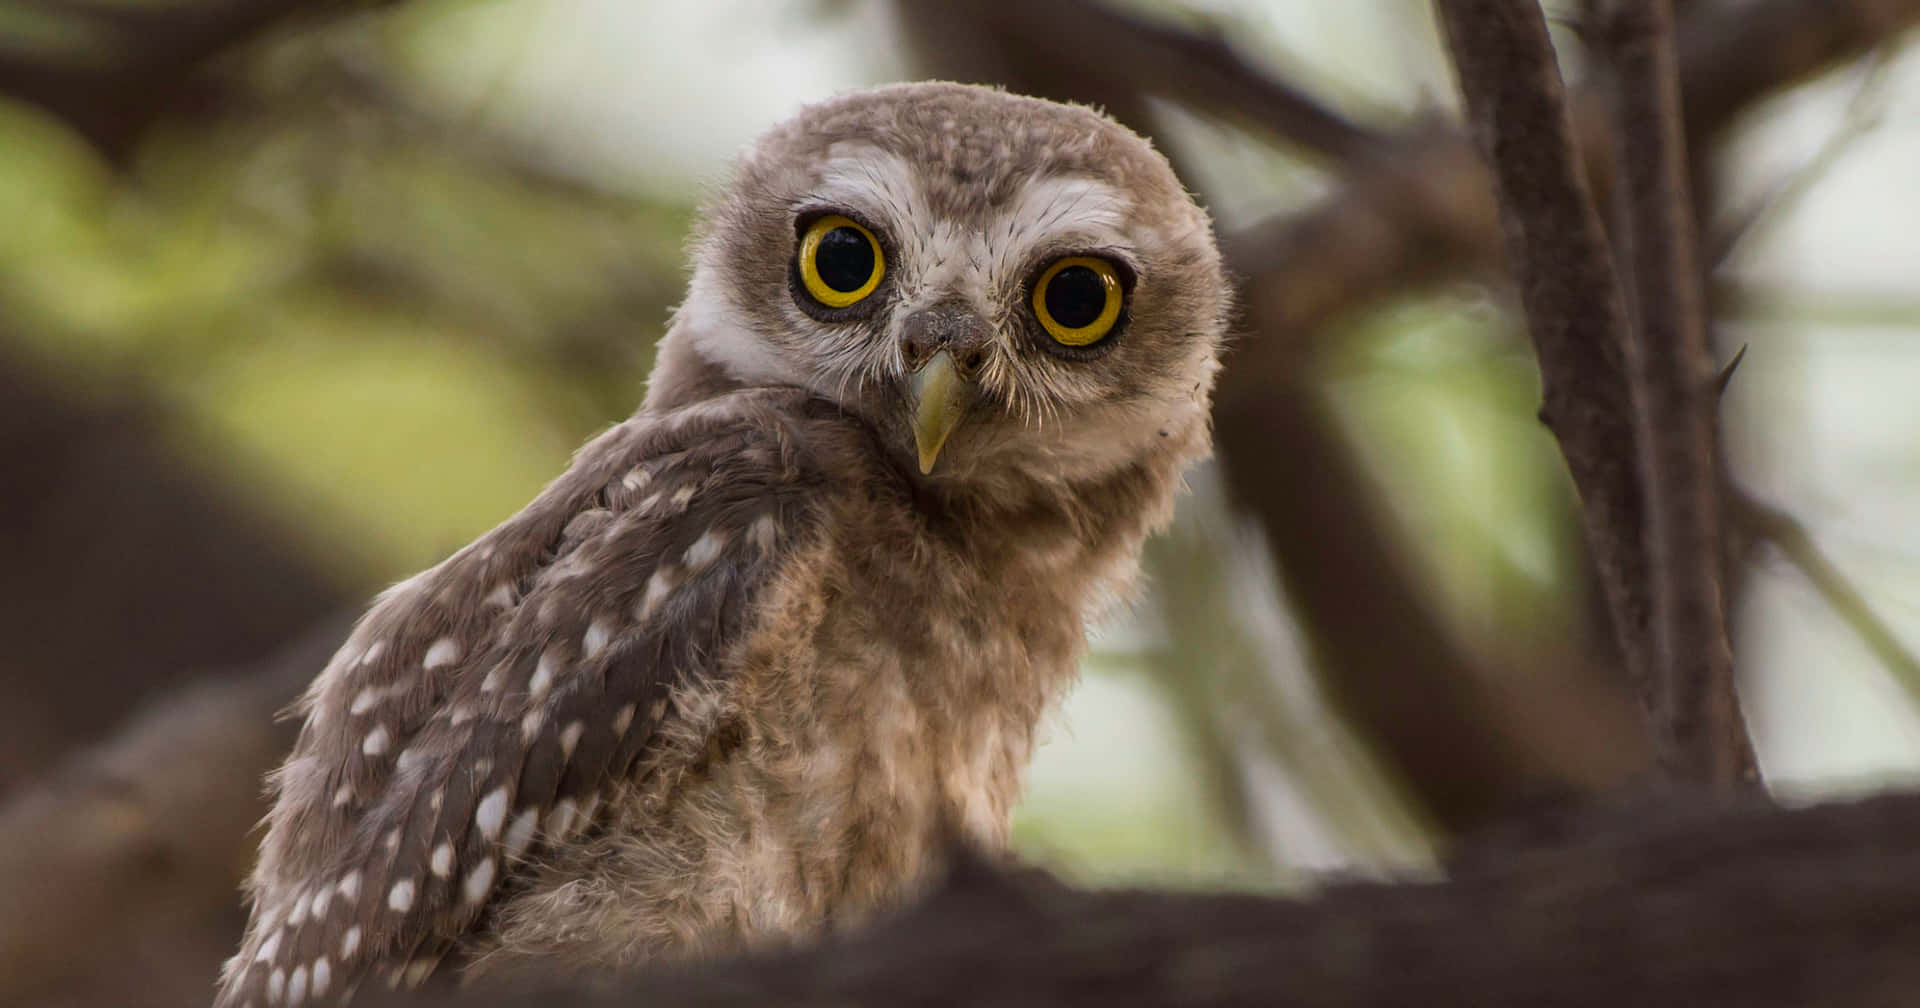 A Small Owl Is Sitting On A Branch